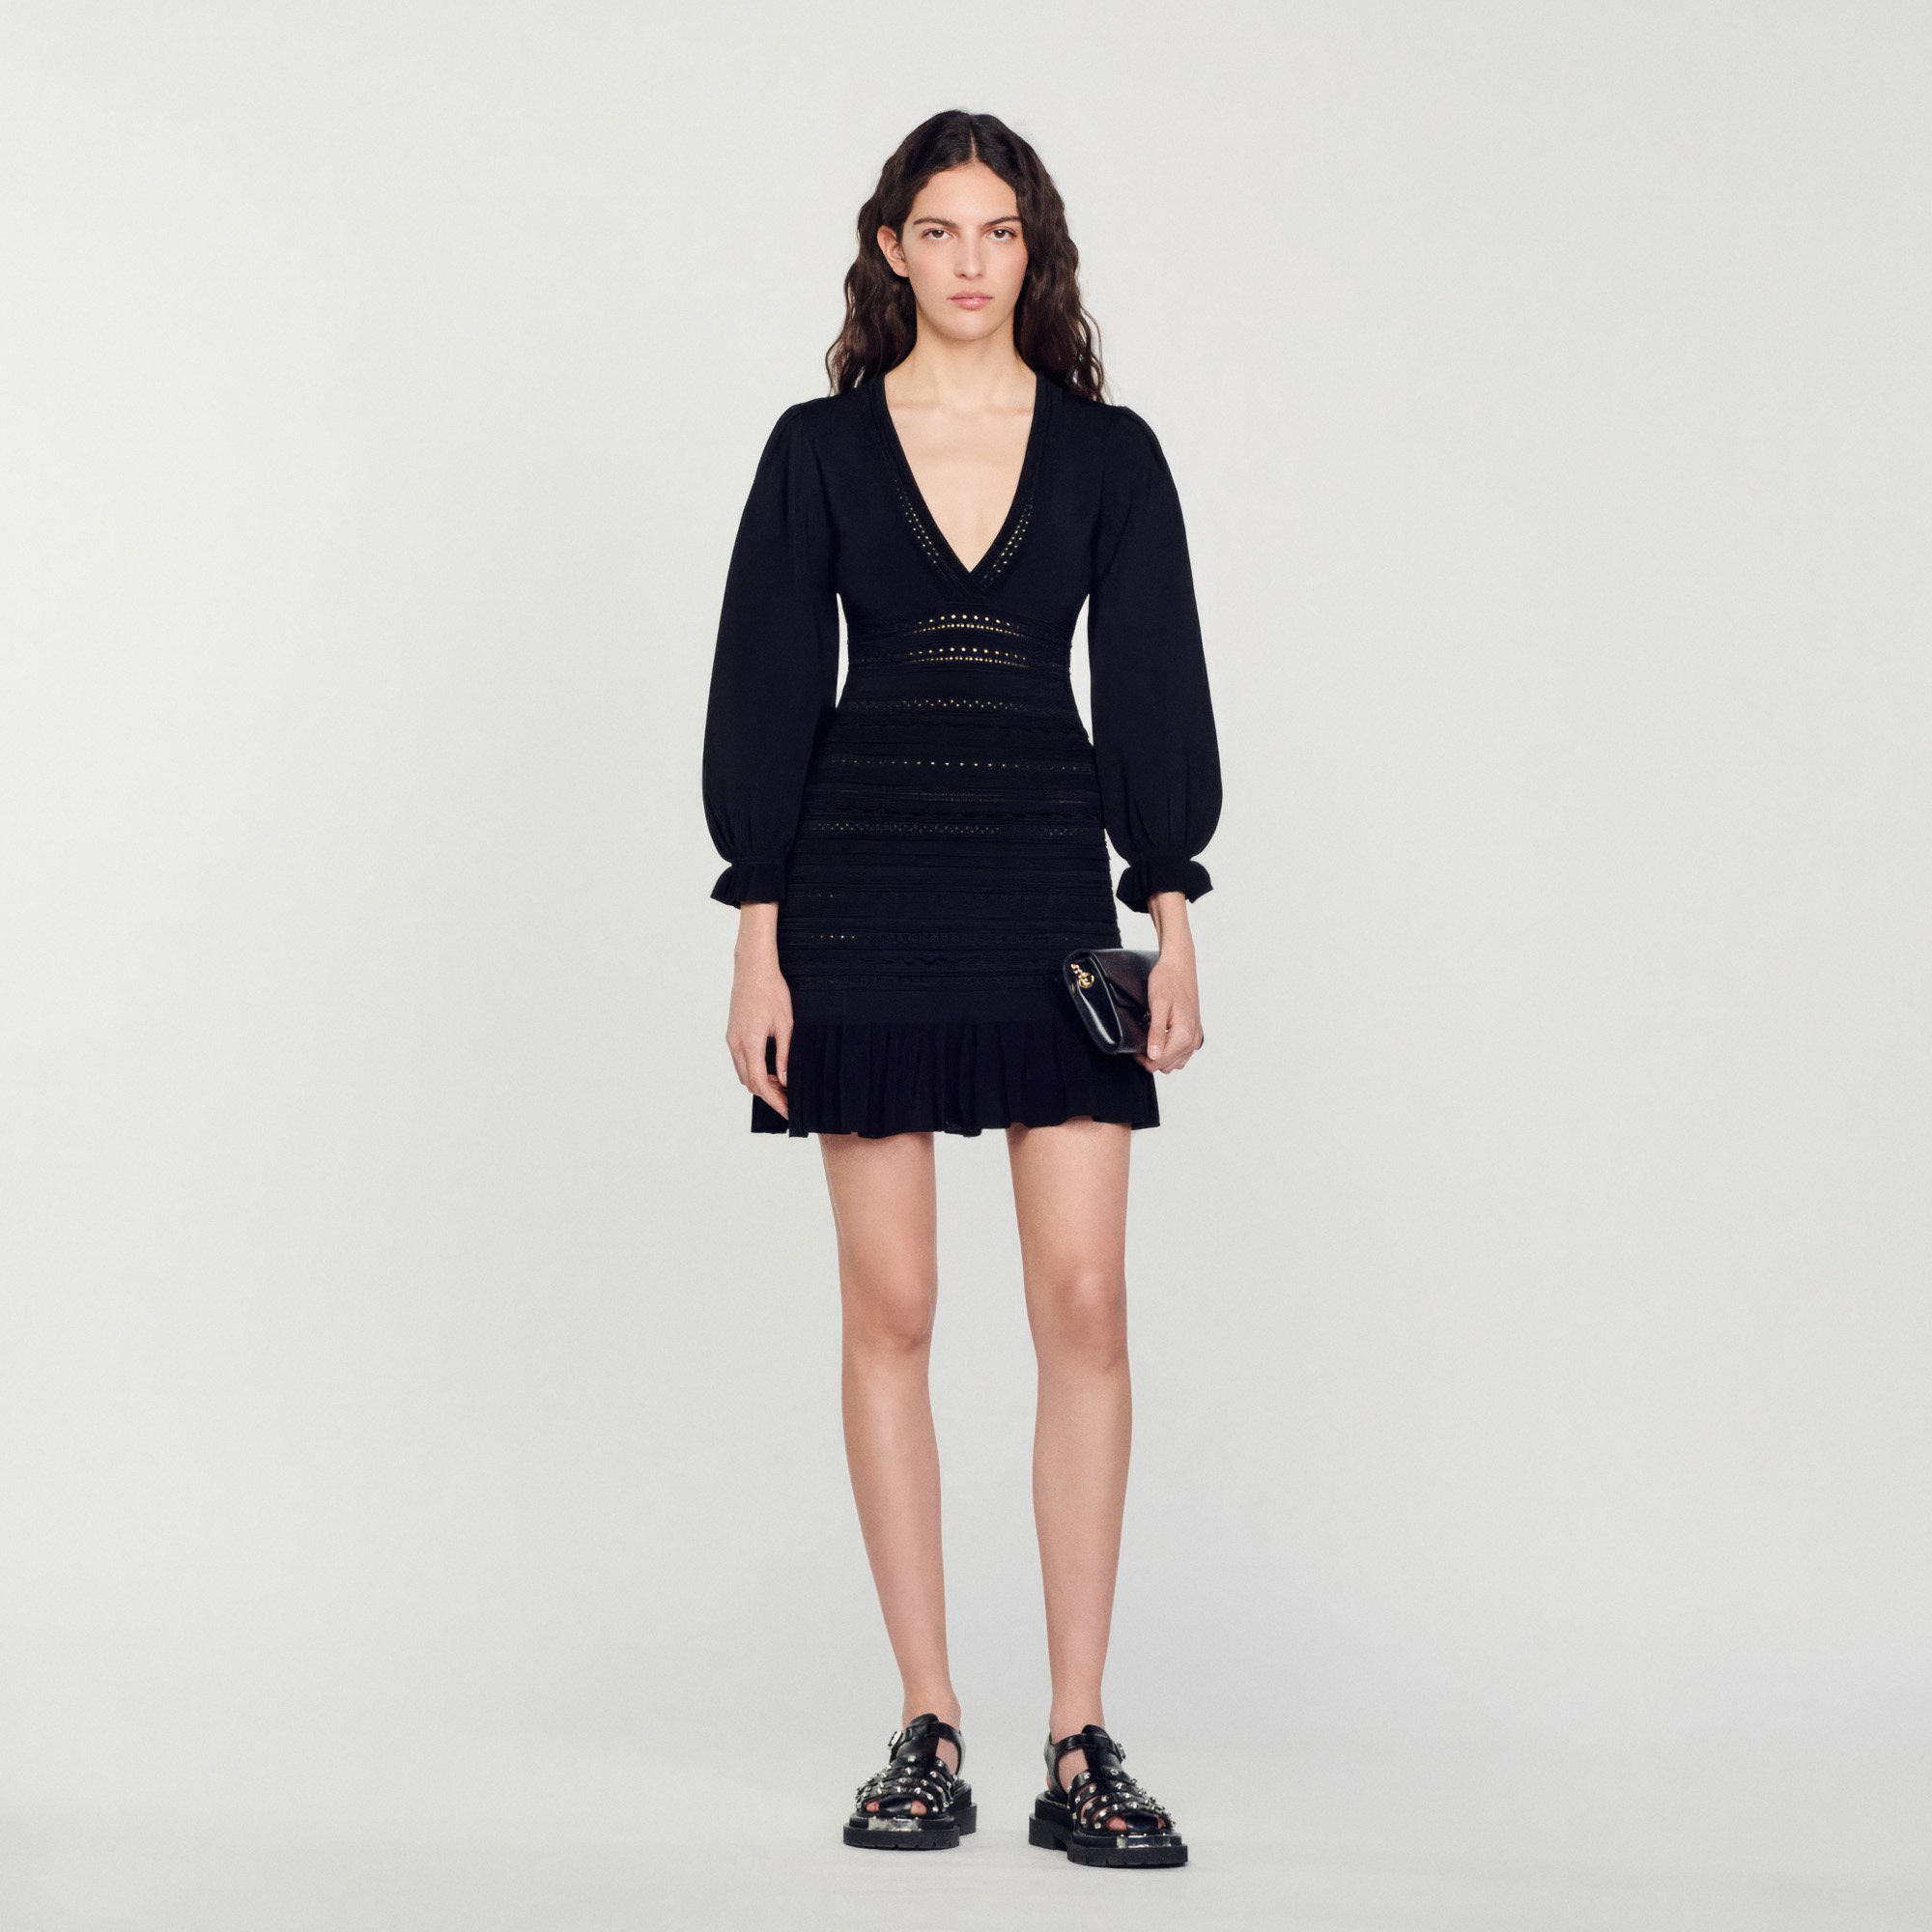 Sandro viscose Short pointelle knit dress featuring a V-shaped neckline, long sleeves, voluminous shoulders, ruffled cuffs, and a ruffle skirt with scalloped details